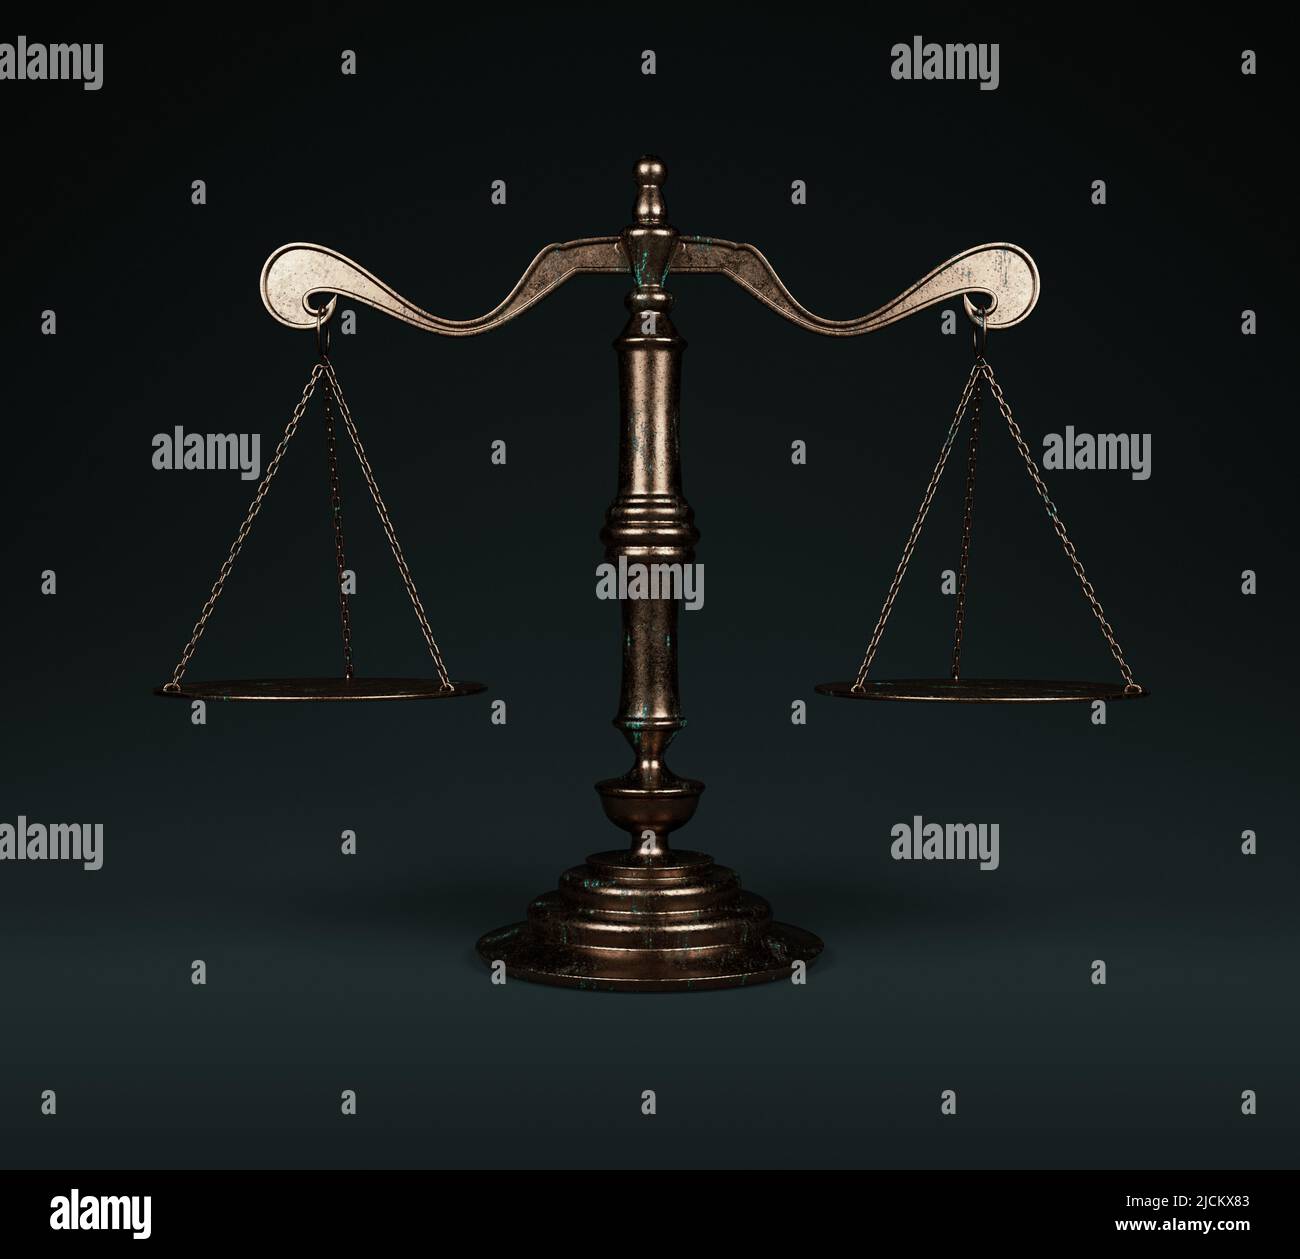 Ornate brass justice scales with a wooden base on a dark isolated background - 3D render Stock Photo